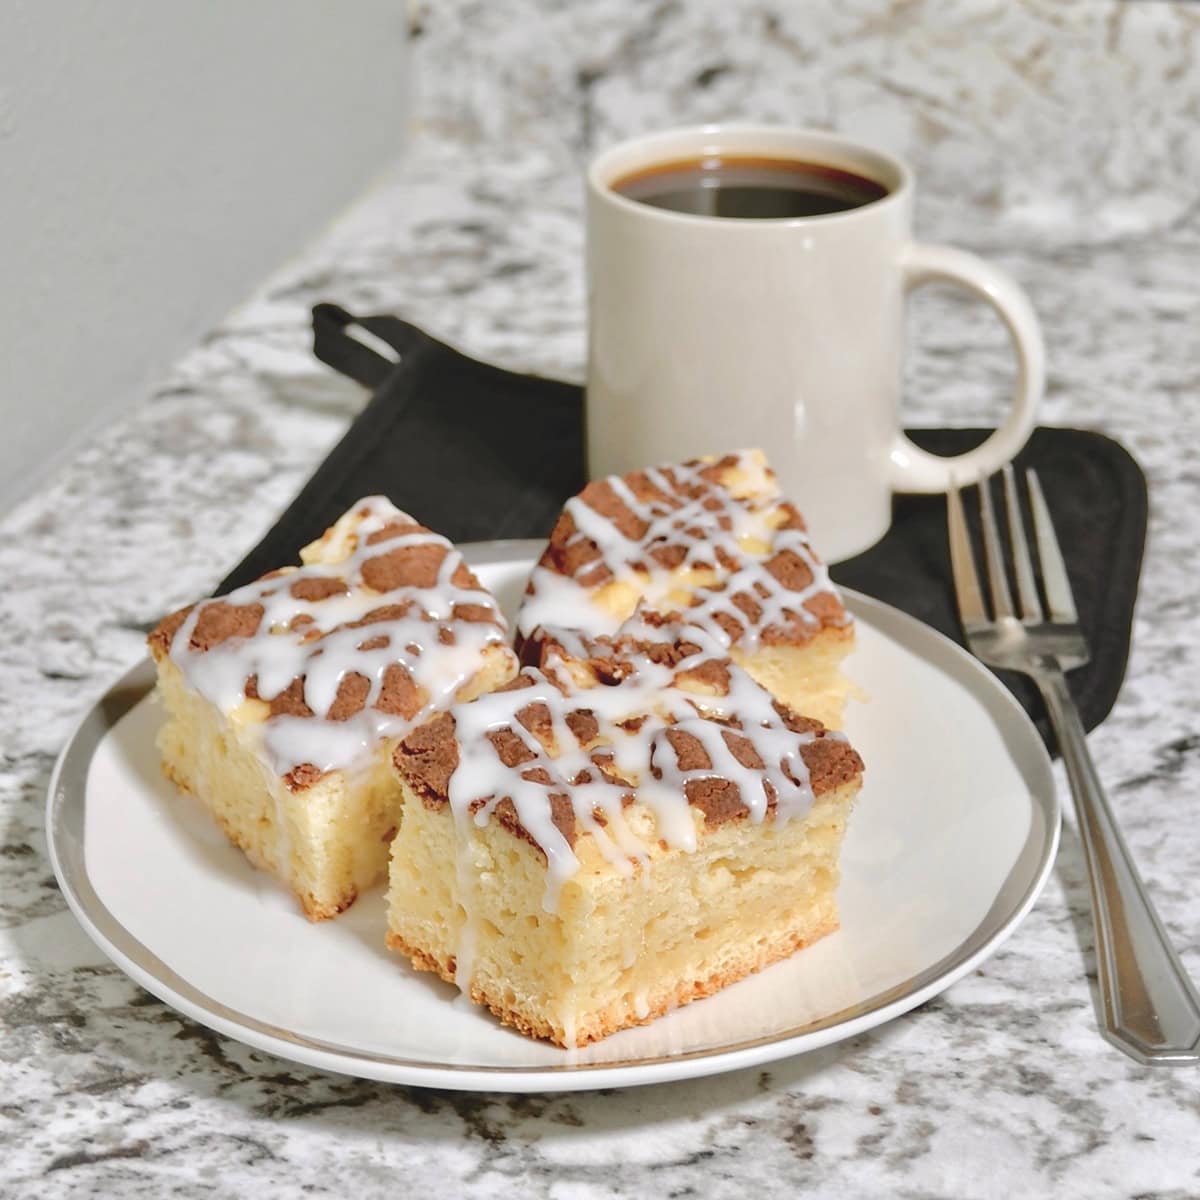 Cup of coffee with cinnamon streusel cake